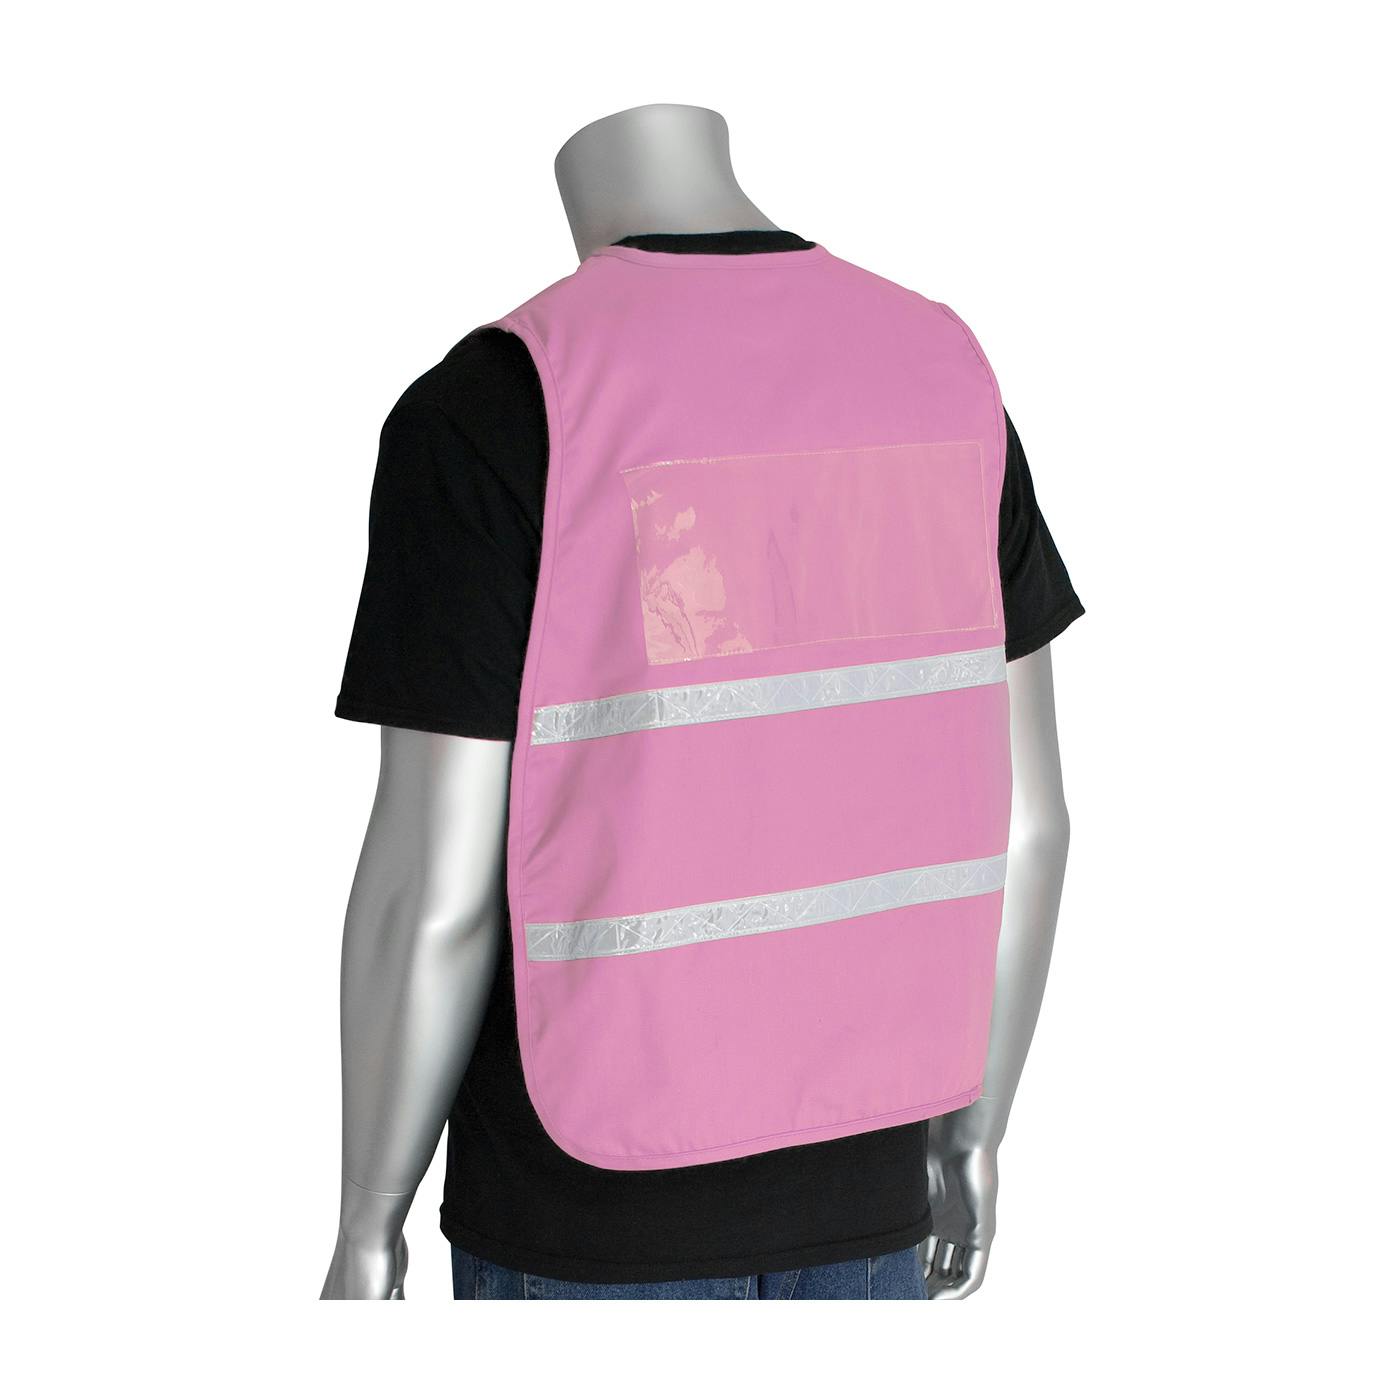 Non-ANSI Incident Command Vest - 100% Polyester, Pink (300-1516)